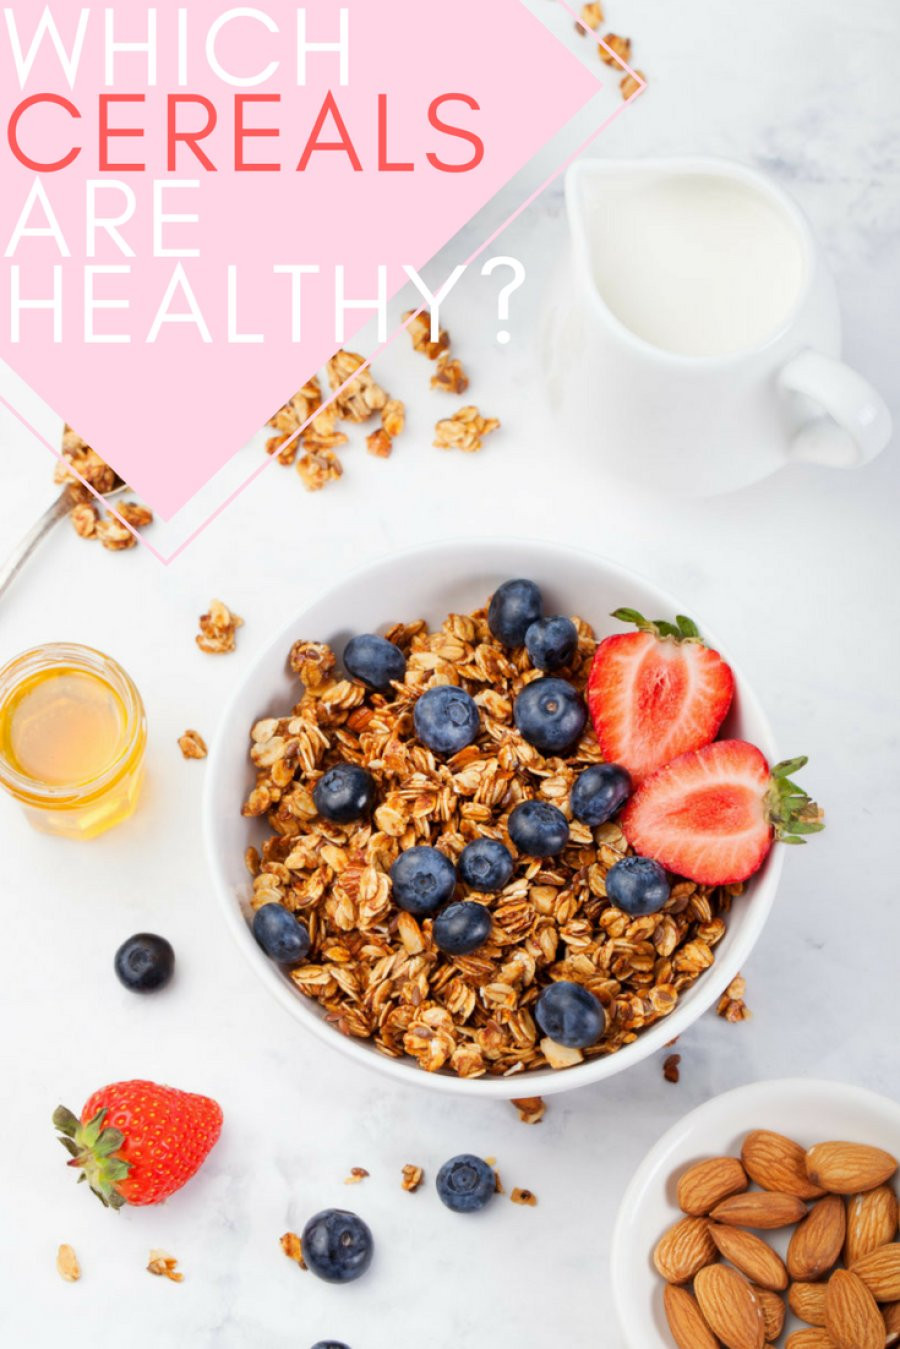 Healthy Breakfast Cereals
 Here Are The Breakfast Cereals That Are Actually Healthy